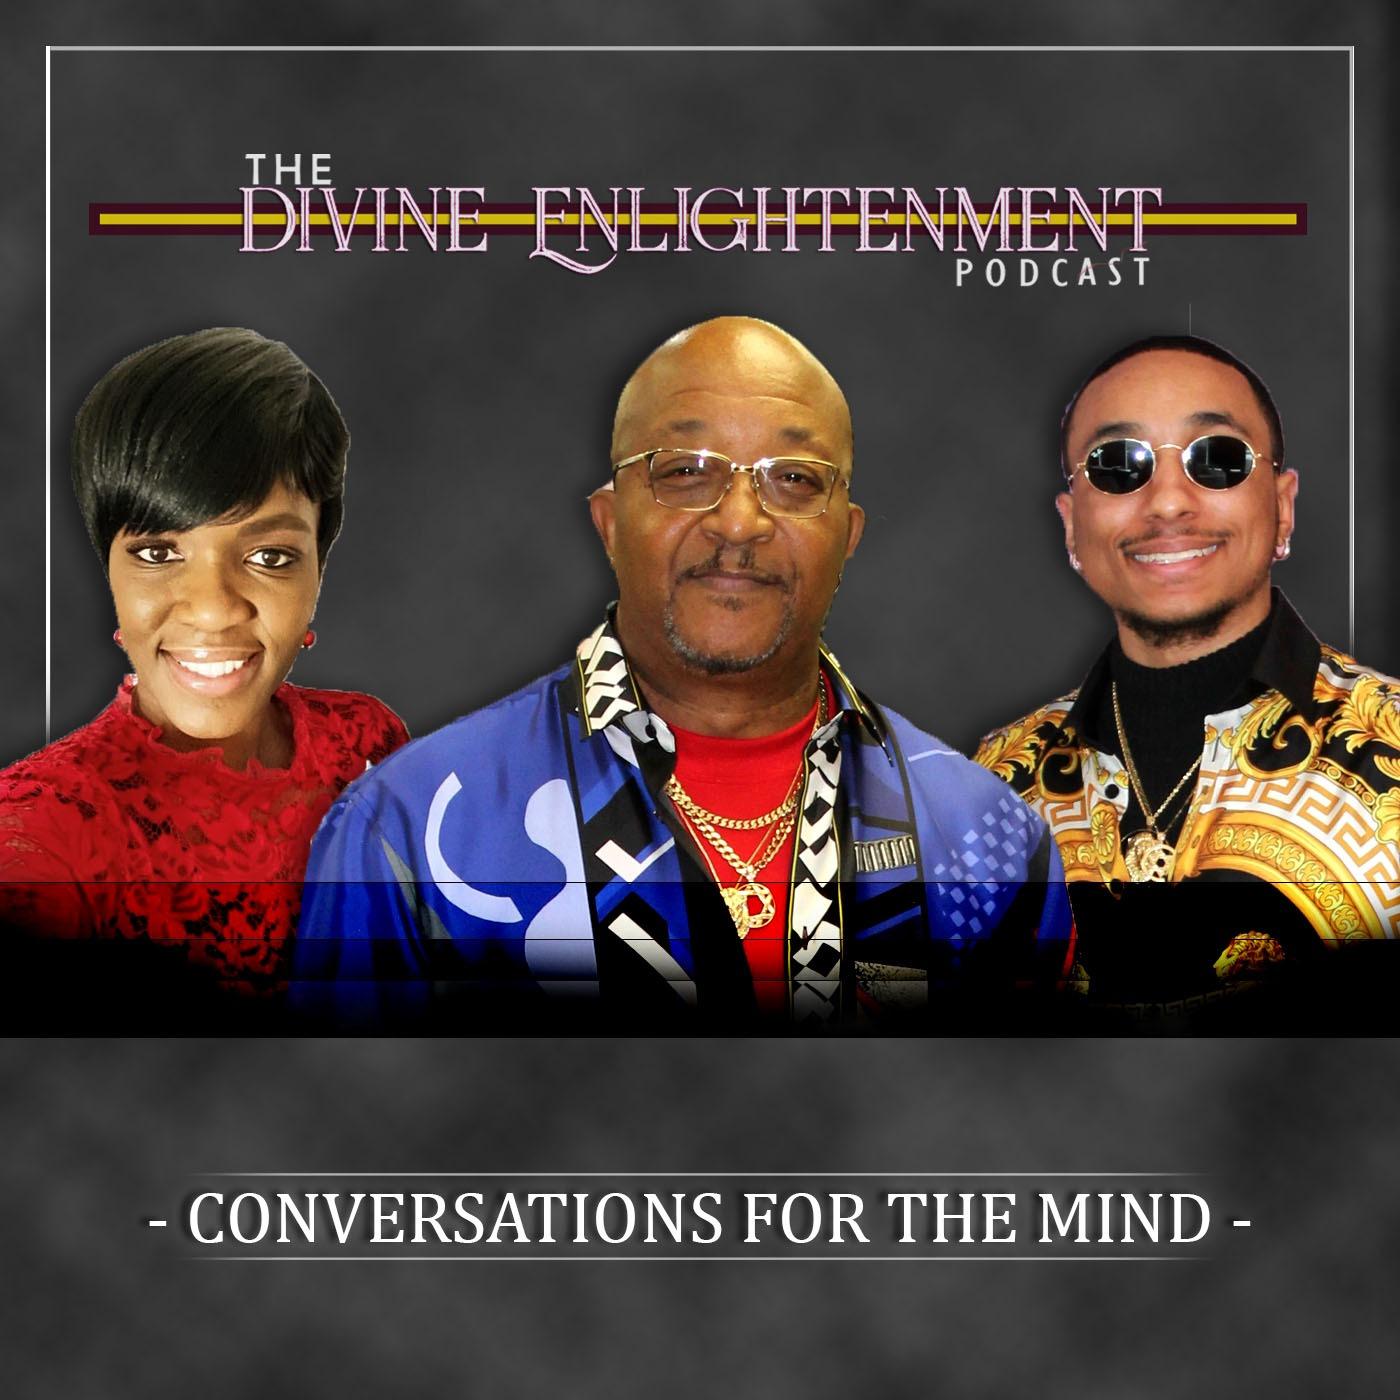 The Divine Enlightenment Podcast